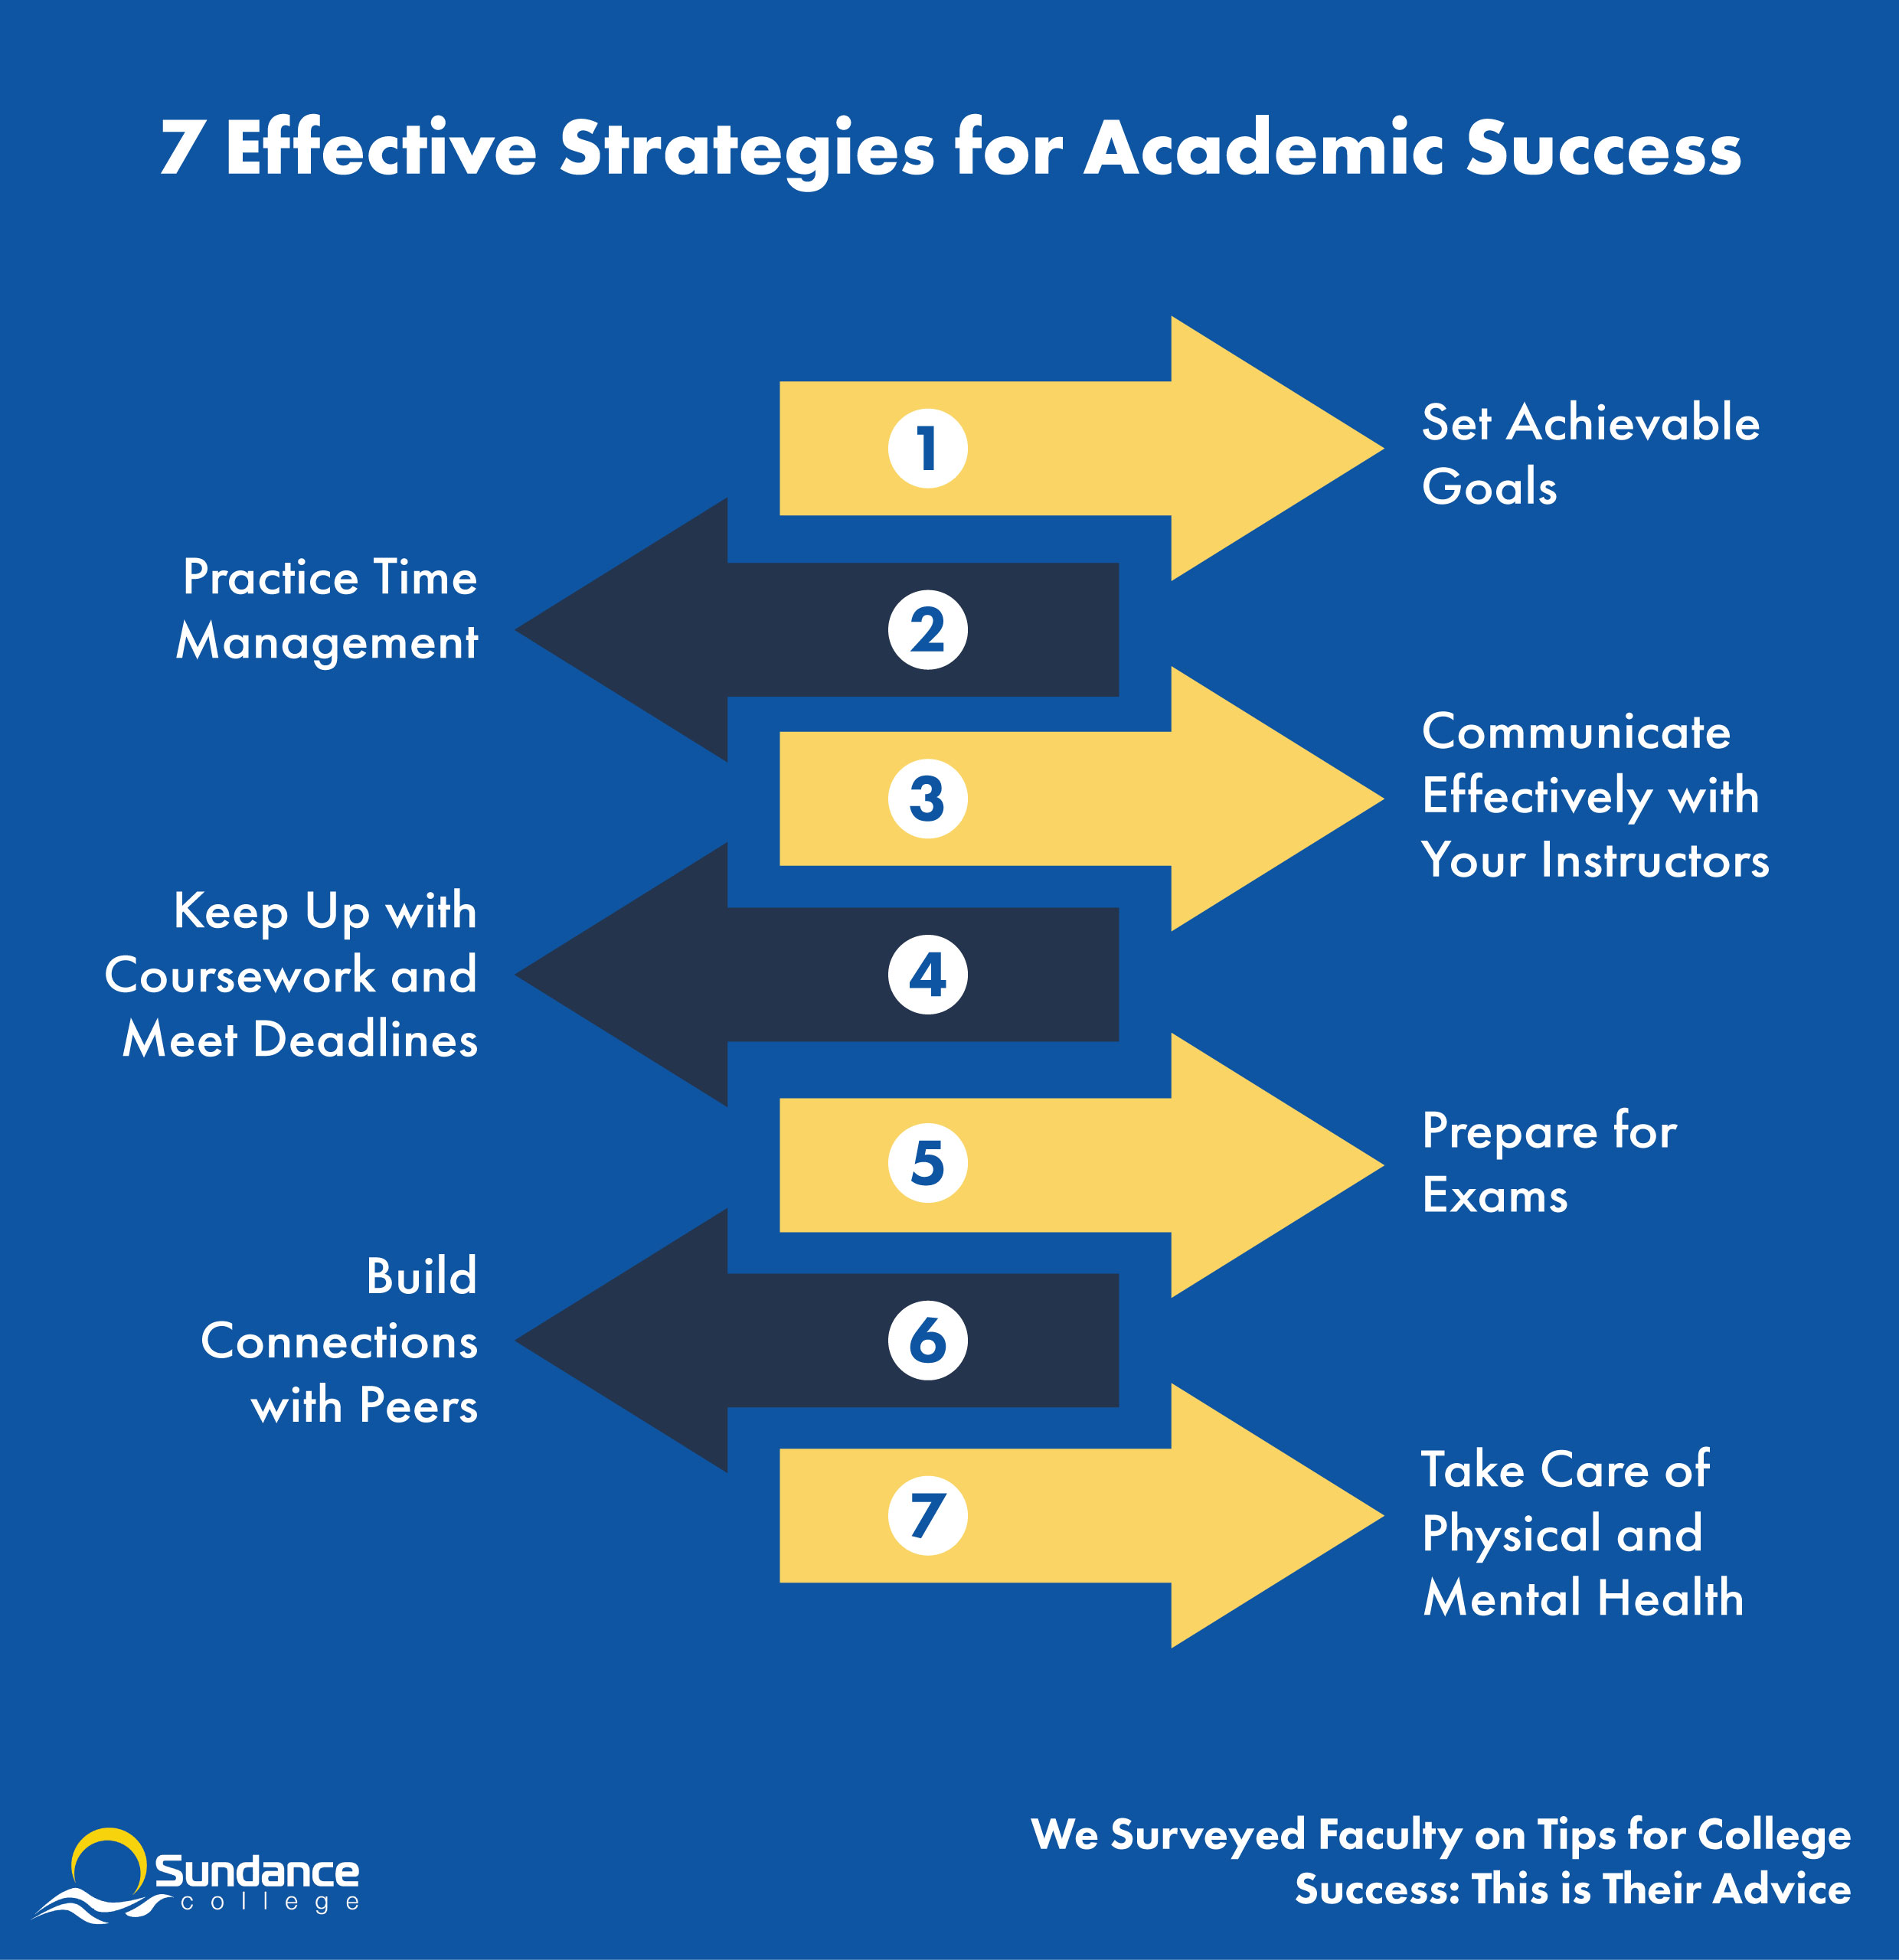 7 Effective Strategies for Academic Success